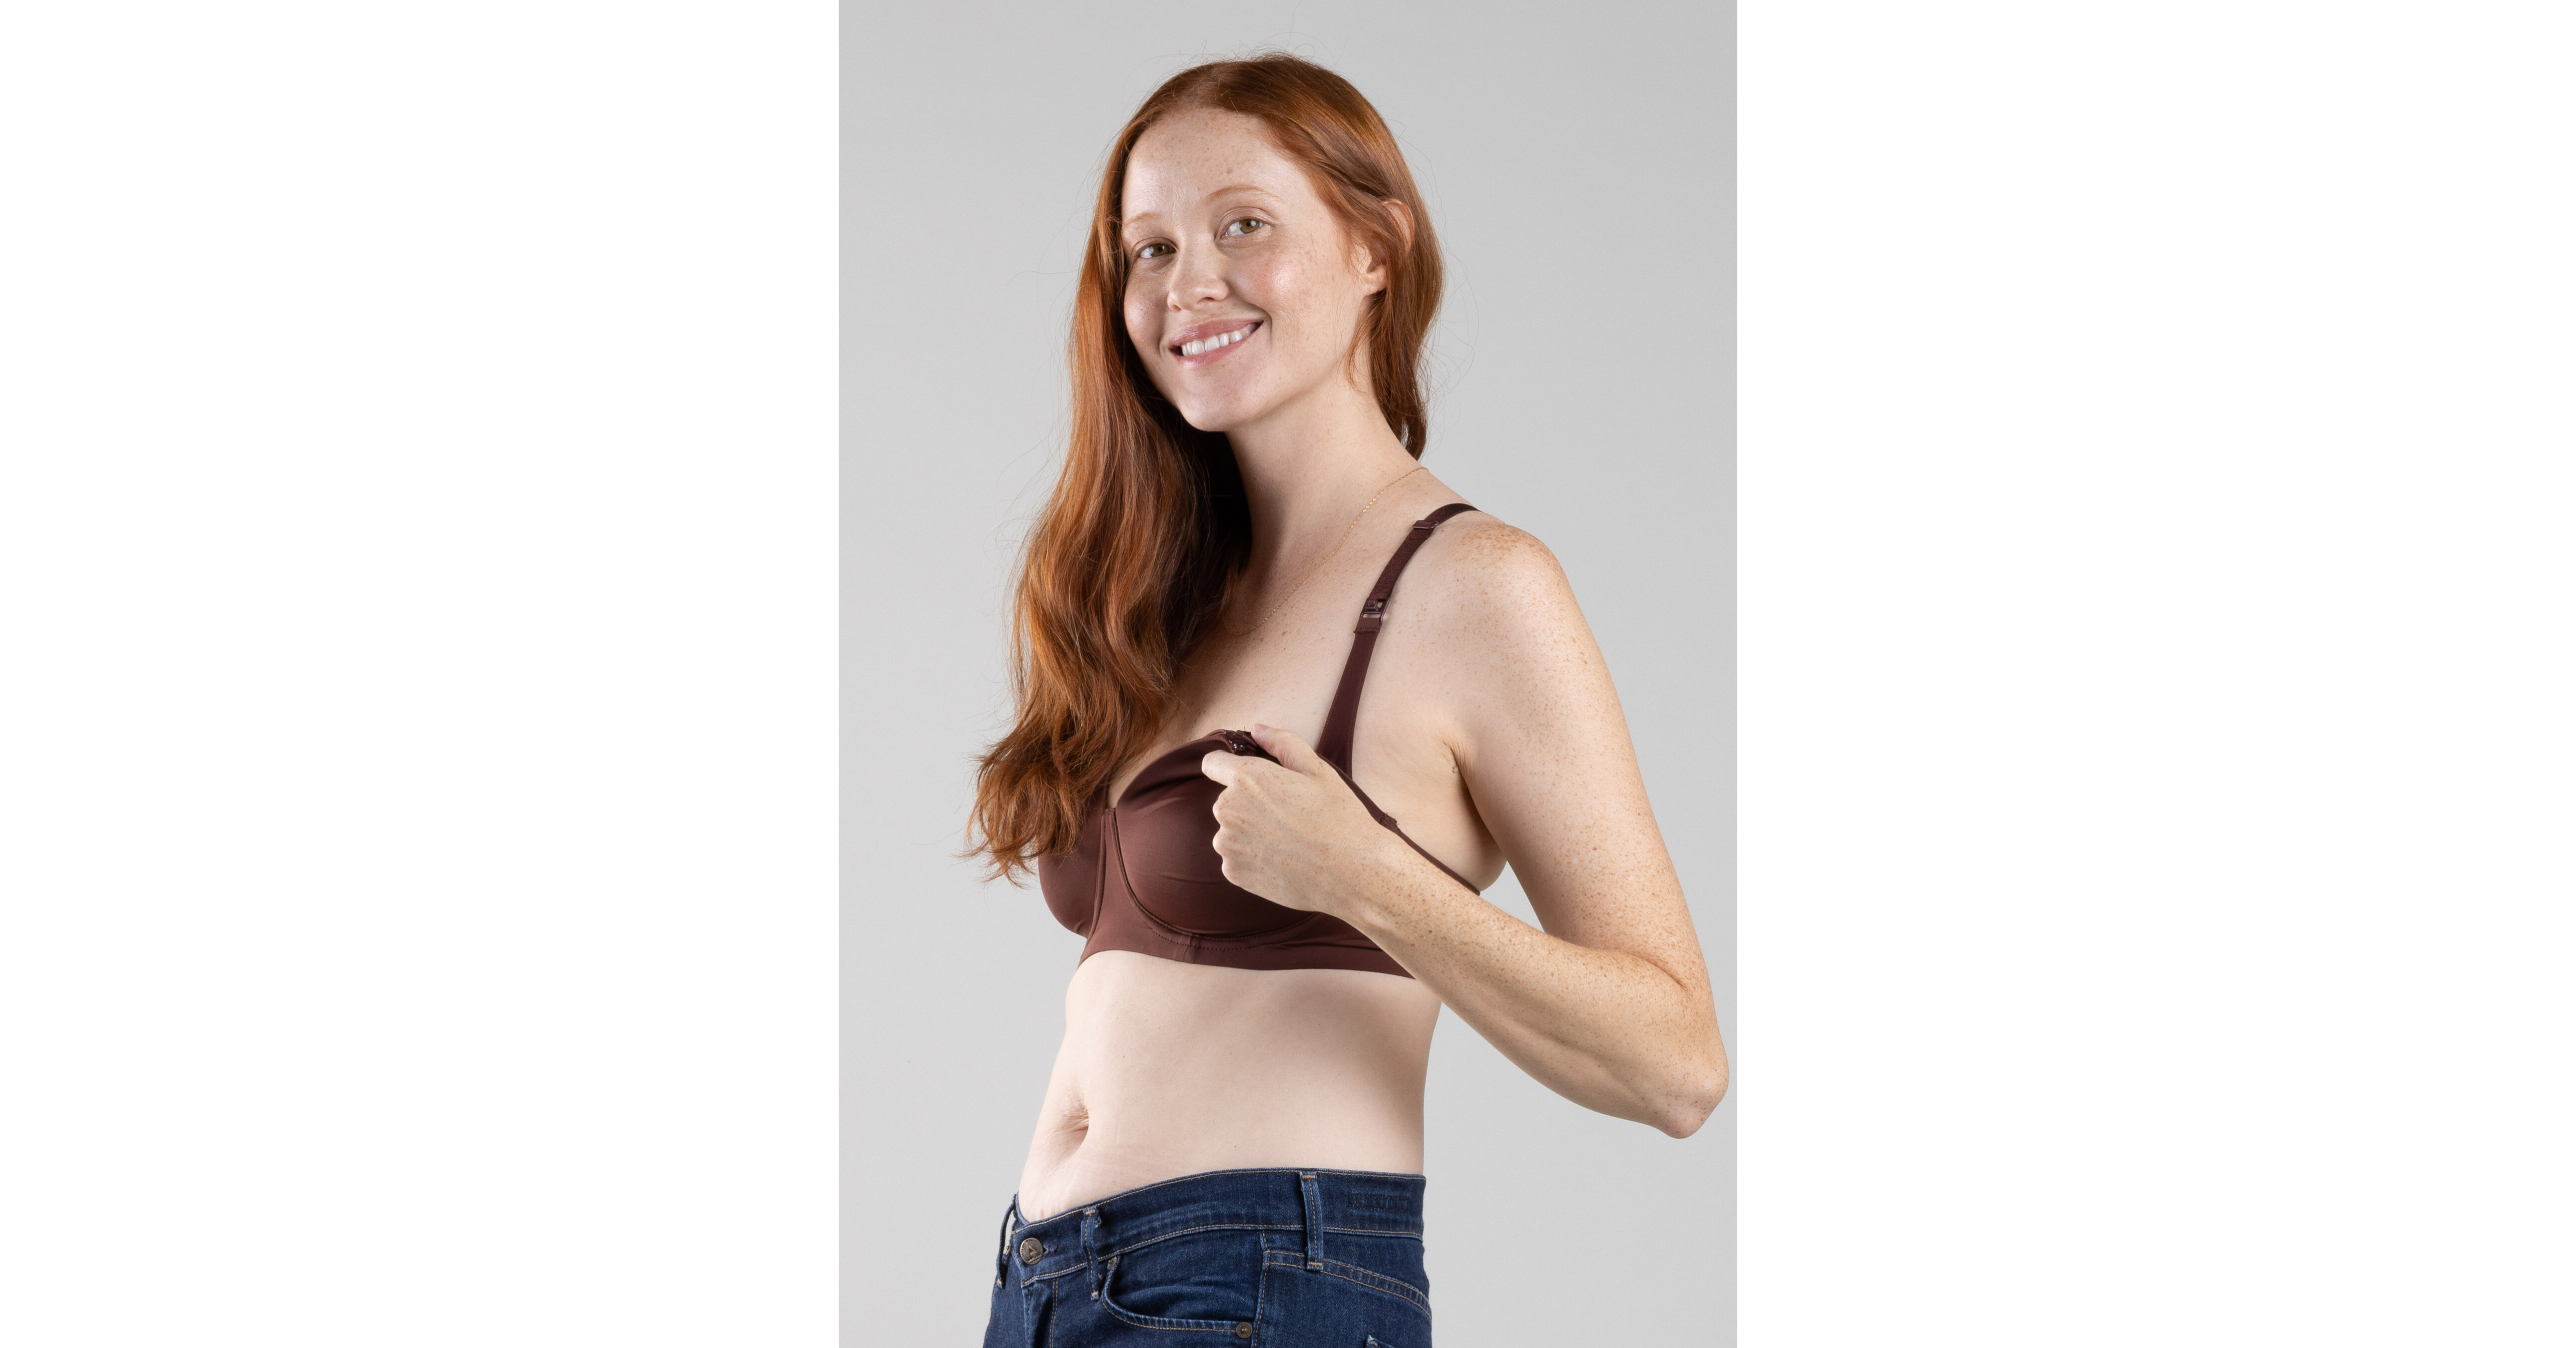 Simple Wishes Supermom Hands Free Pumping Bra with SimpleClasp